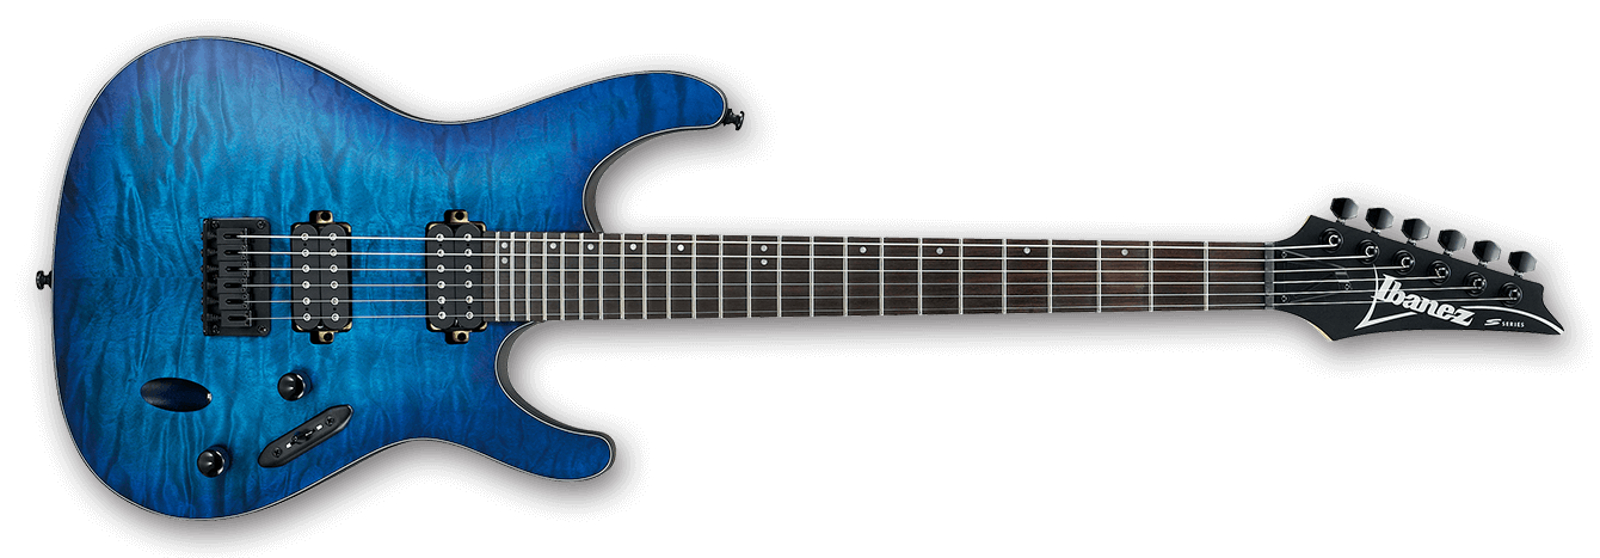 Ibanez S621QM S Series Electric Guitar with Quilted Maple Top - Dragon Eye Burst for sale